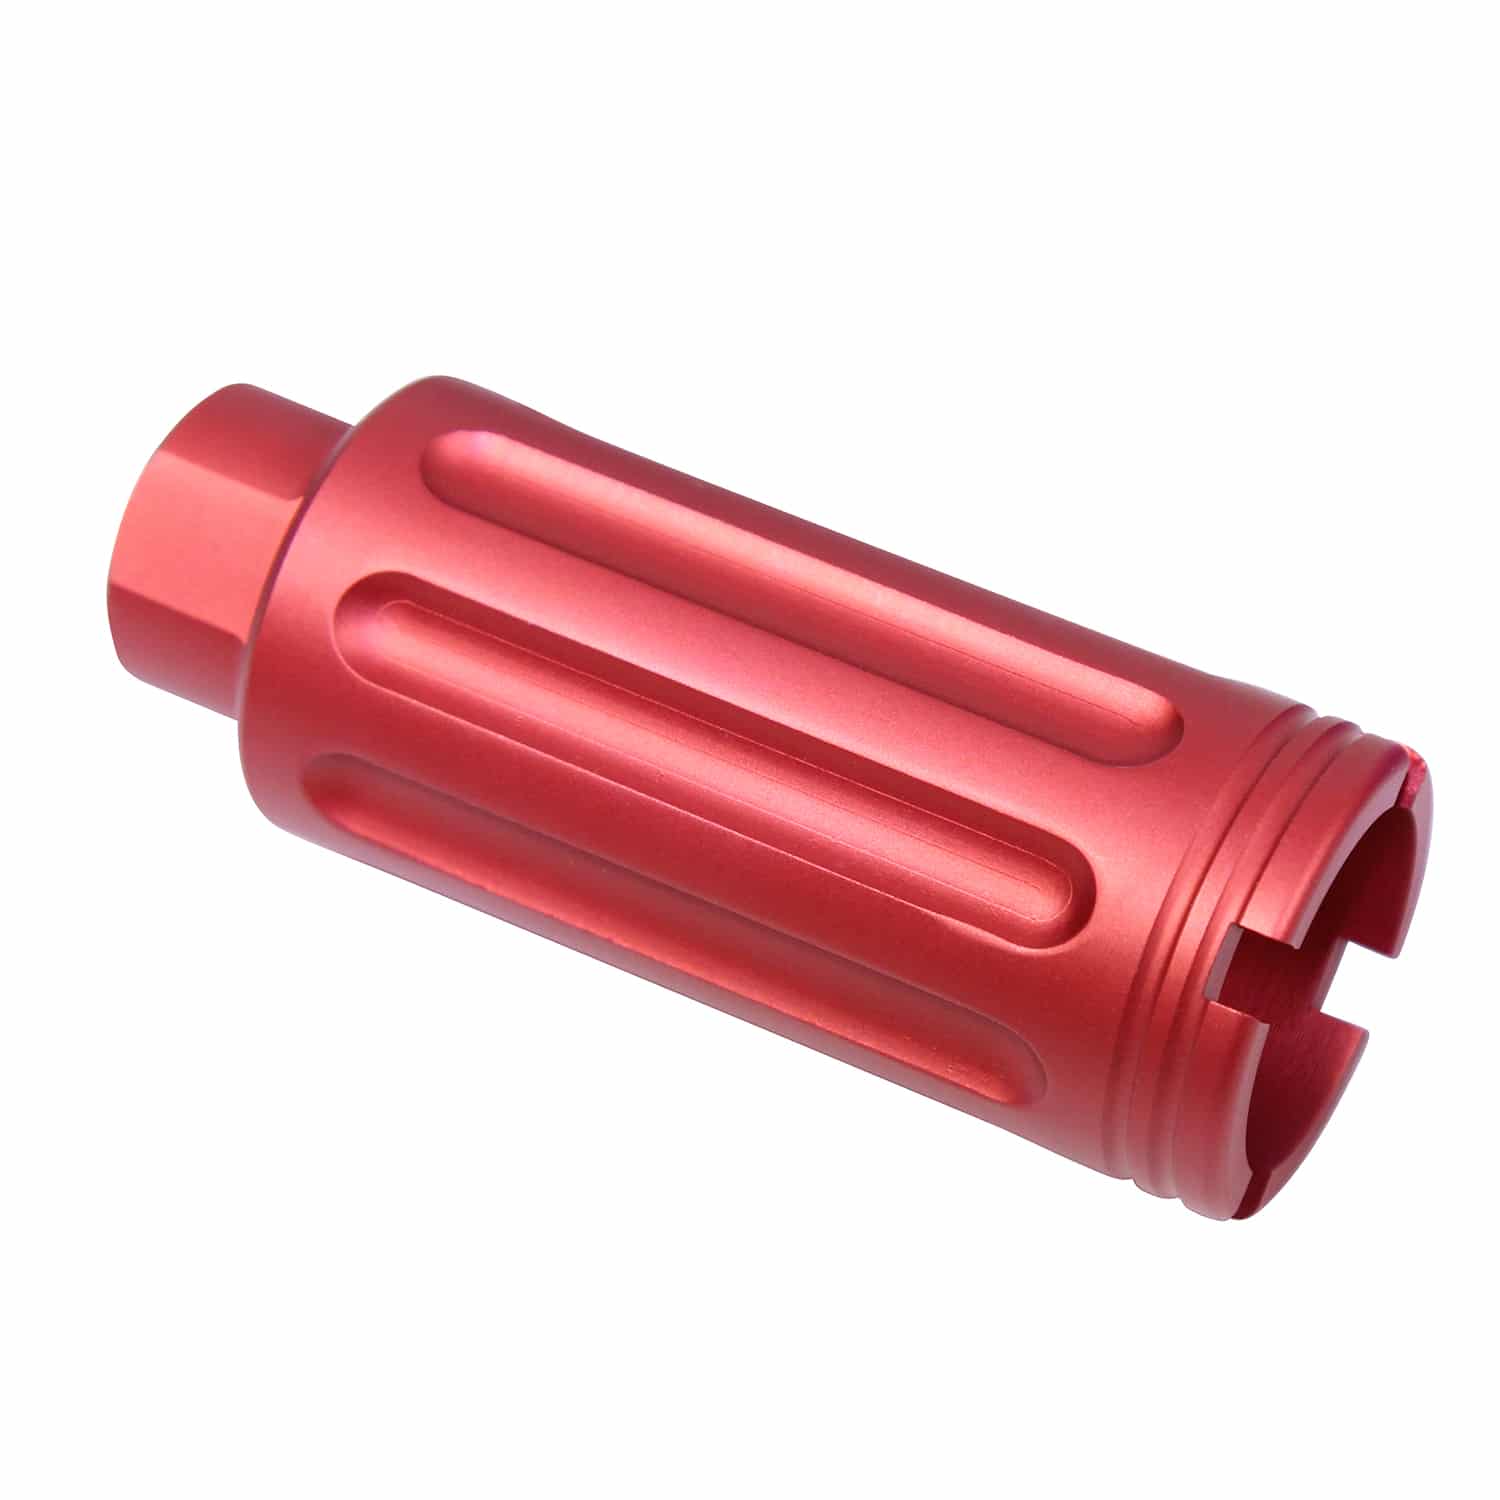 AR-15 Slim Line Cone Flash Can Gen 2 in Anodized Red